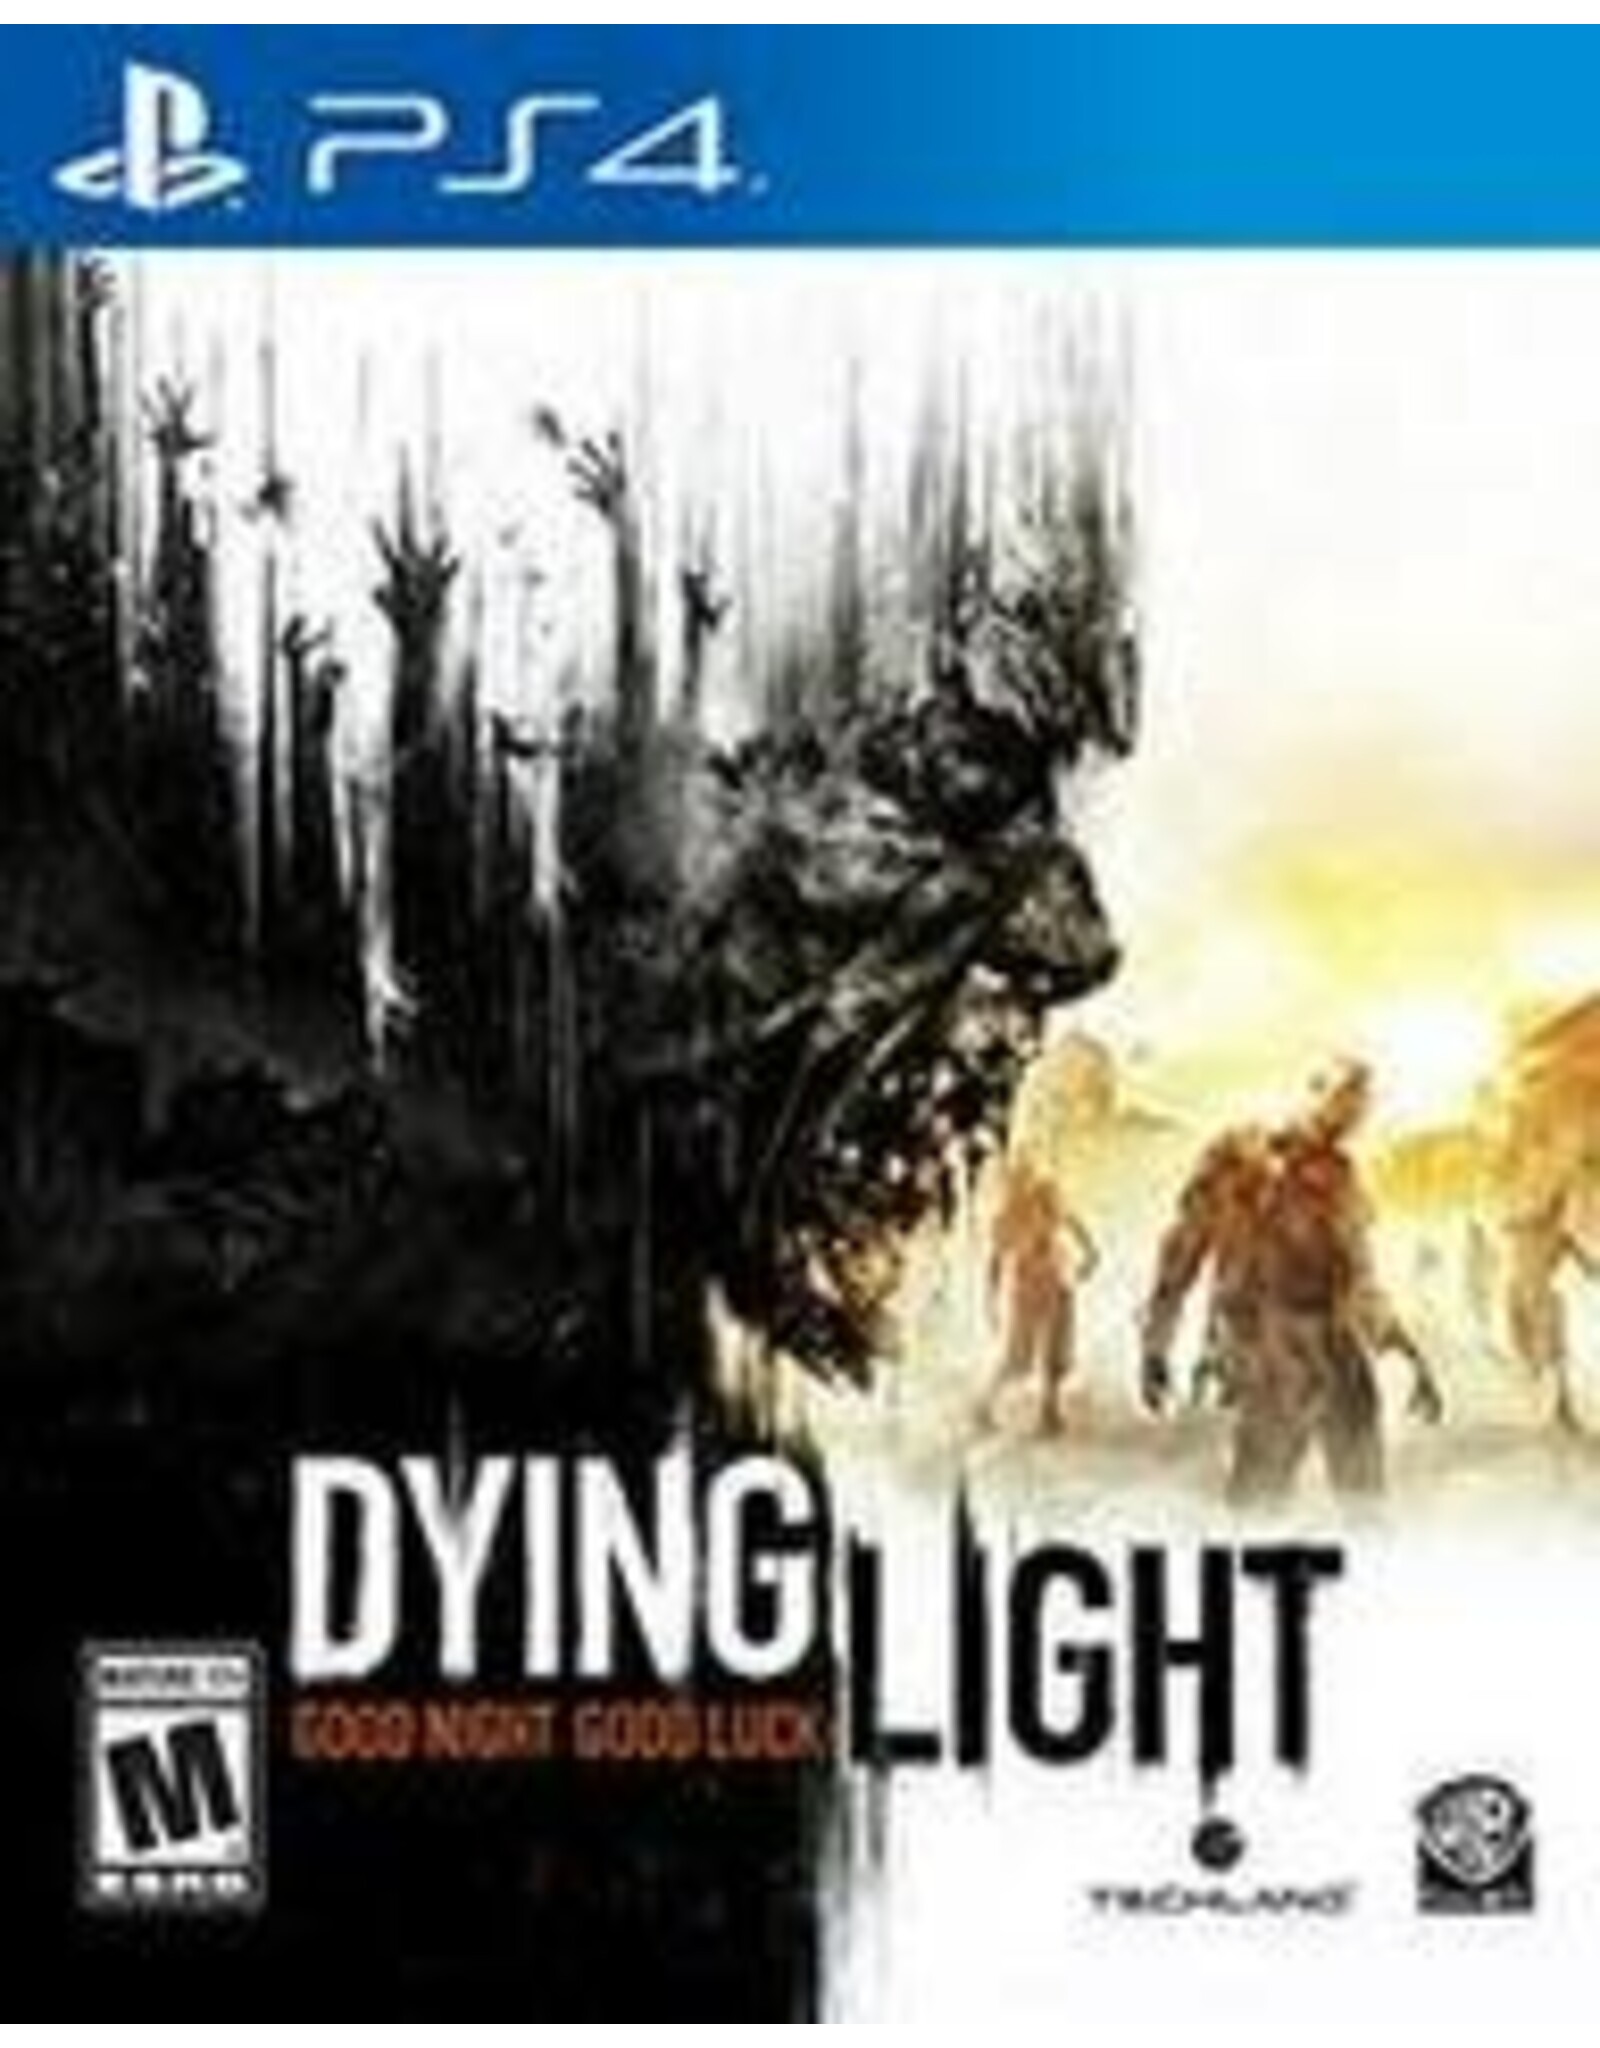 Playstation 4 Dying Light (Used)